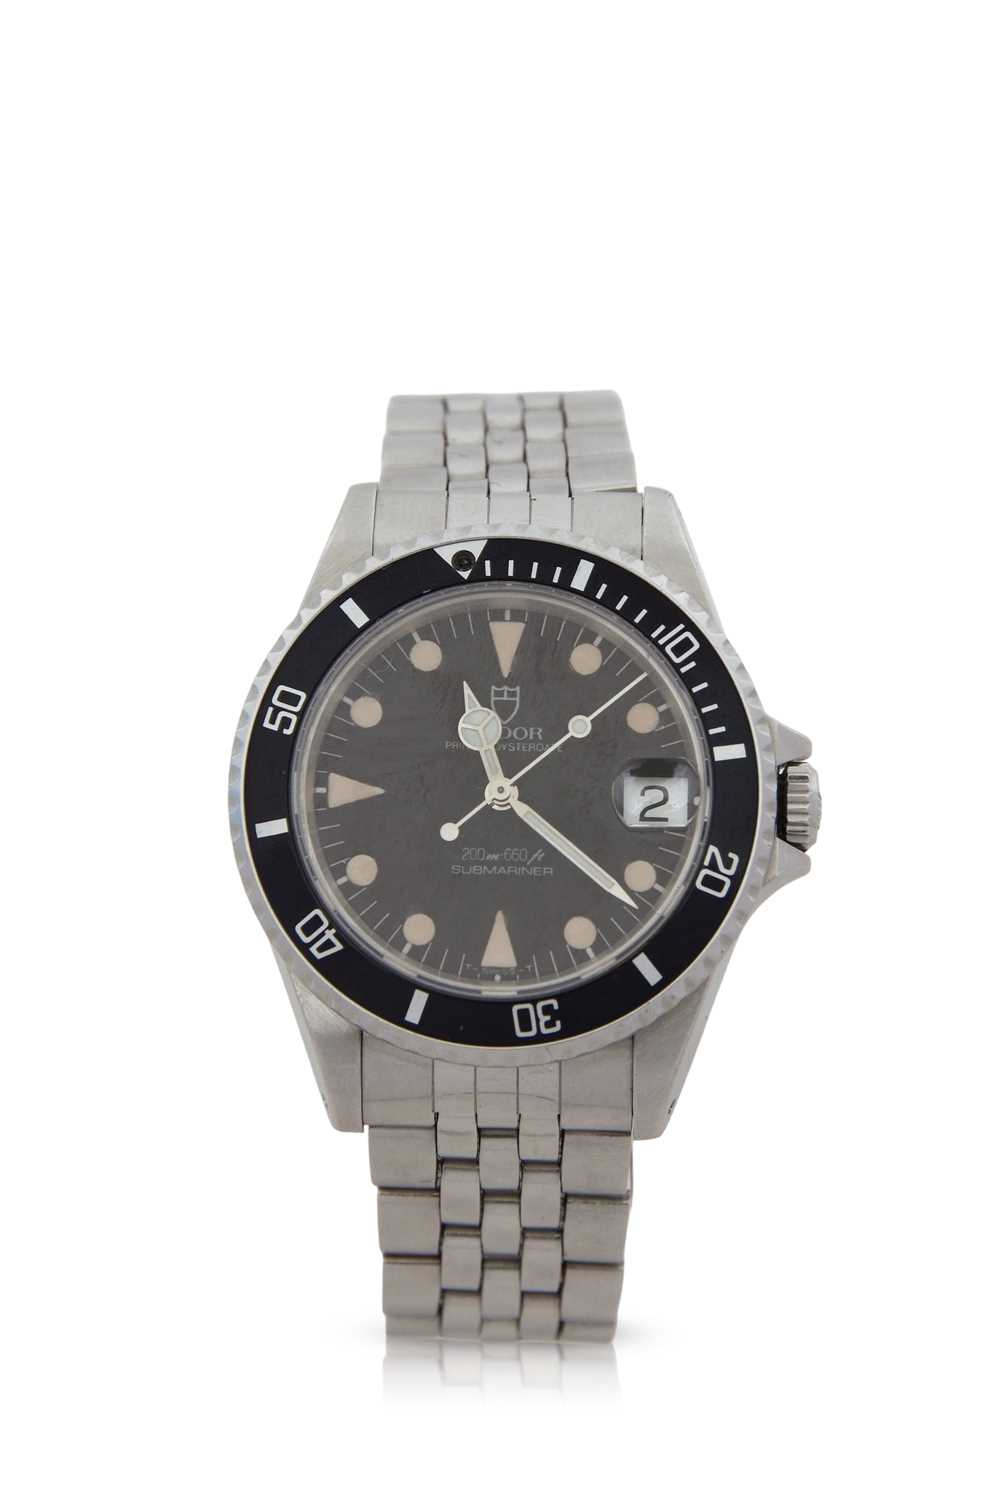 A Tudor Submariner Prince Oyster date, reference 75090, the watch has a stainless steel case and